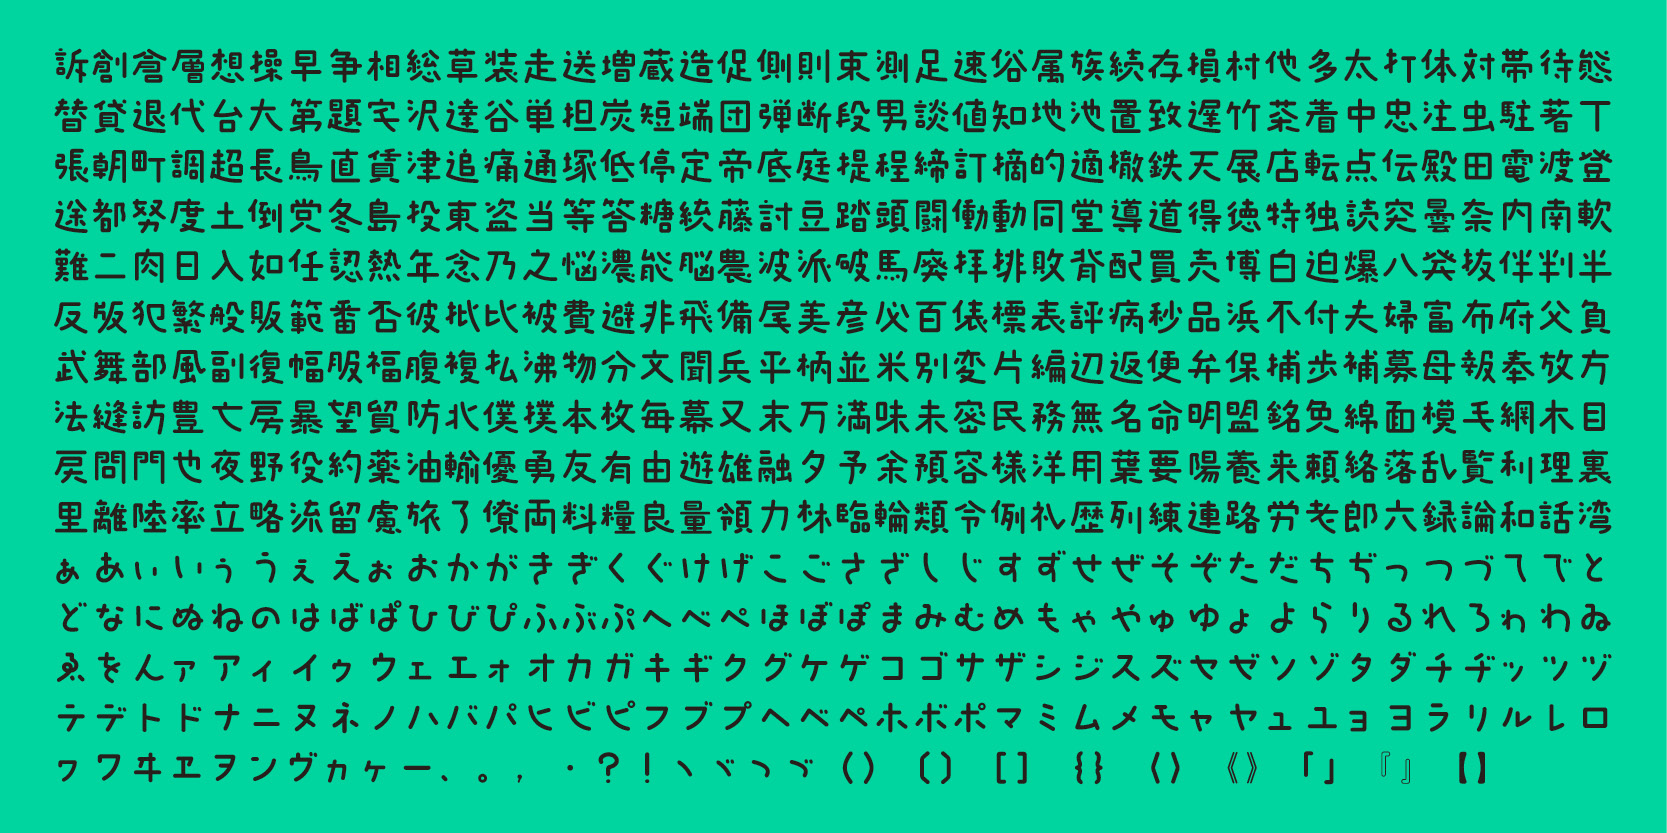 Card displaying AB Maruhanamaki typeface in various styles